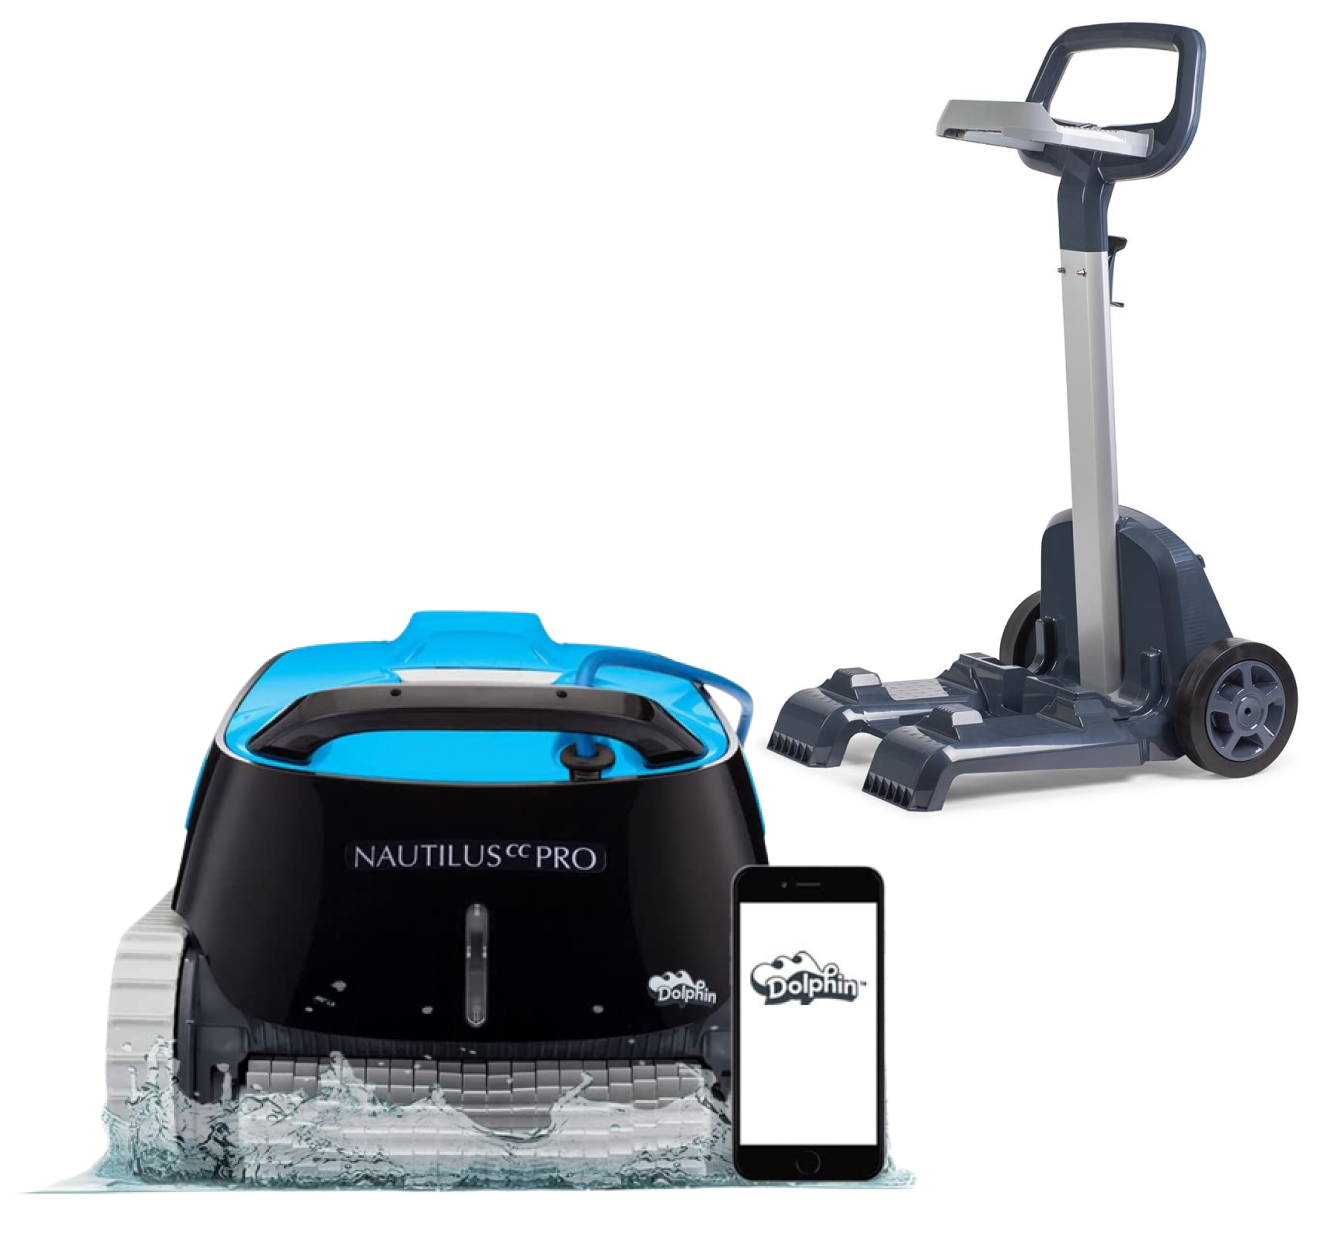 Dolphin Nautilus CC Pro Robot Pool Cleaner With WiFi and Carry Caddy Bundle